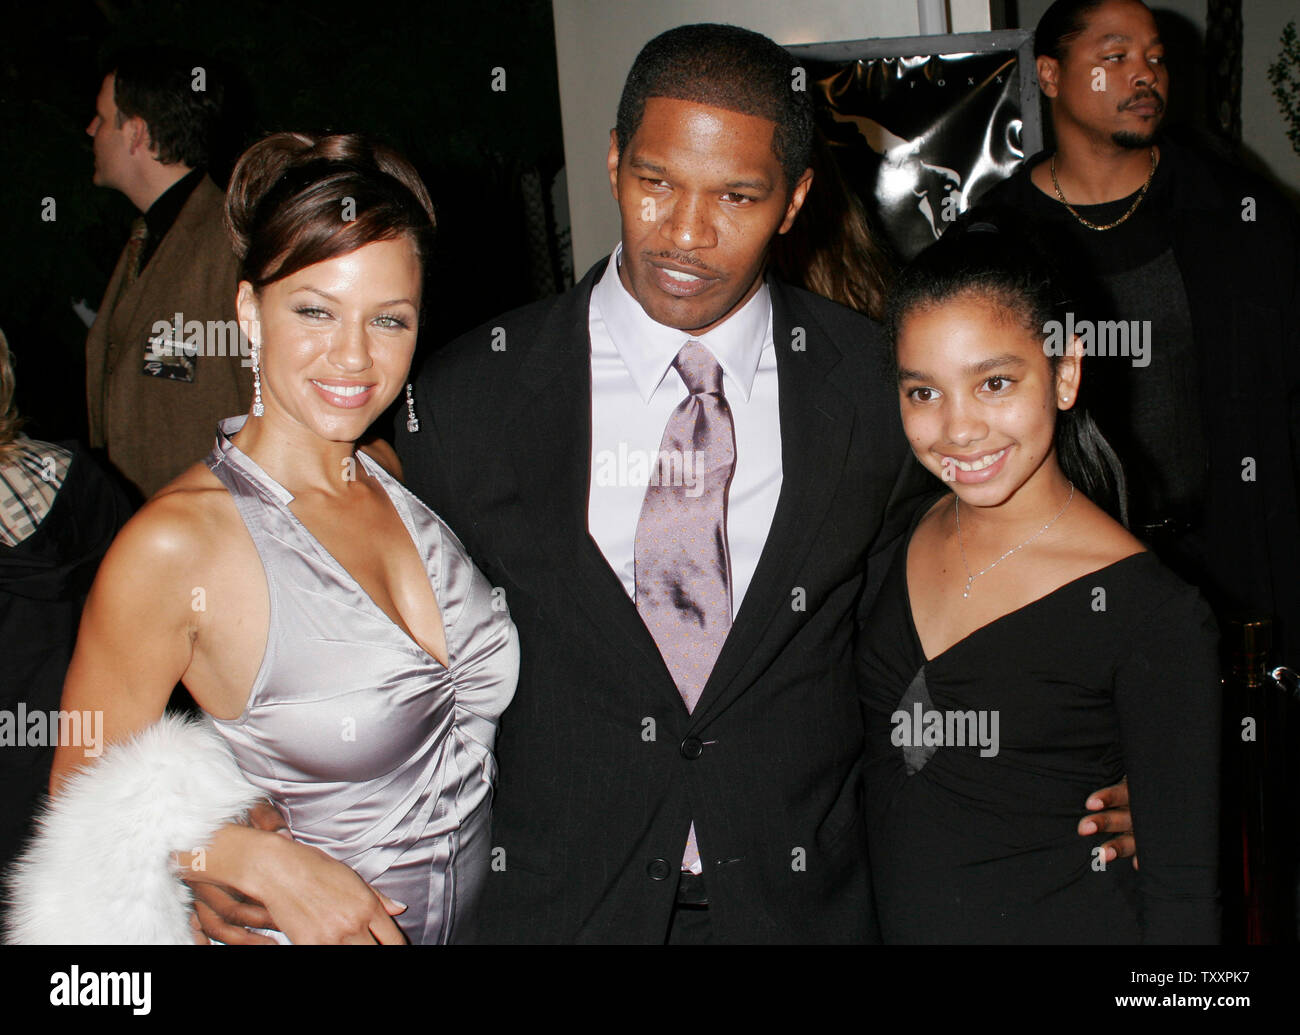 Actor Jamie Foxx, center, his girlfriend, Leila Arcieri (L) and his daughter, Corinne (R) pose for photographers at the premiere of the new  film 'Ray' about the life and music of the late singer Ray Charles in Los Angeles,  October 19, 2004. The film starring Foxx as Ray Charles, opens in the United States October 29. (UPI Photo/Francis Specker) Stock Photo